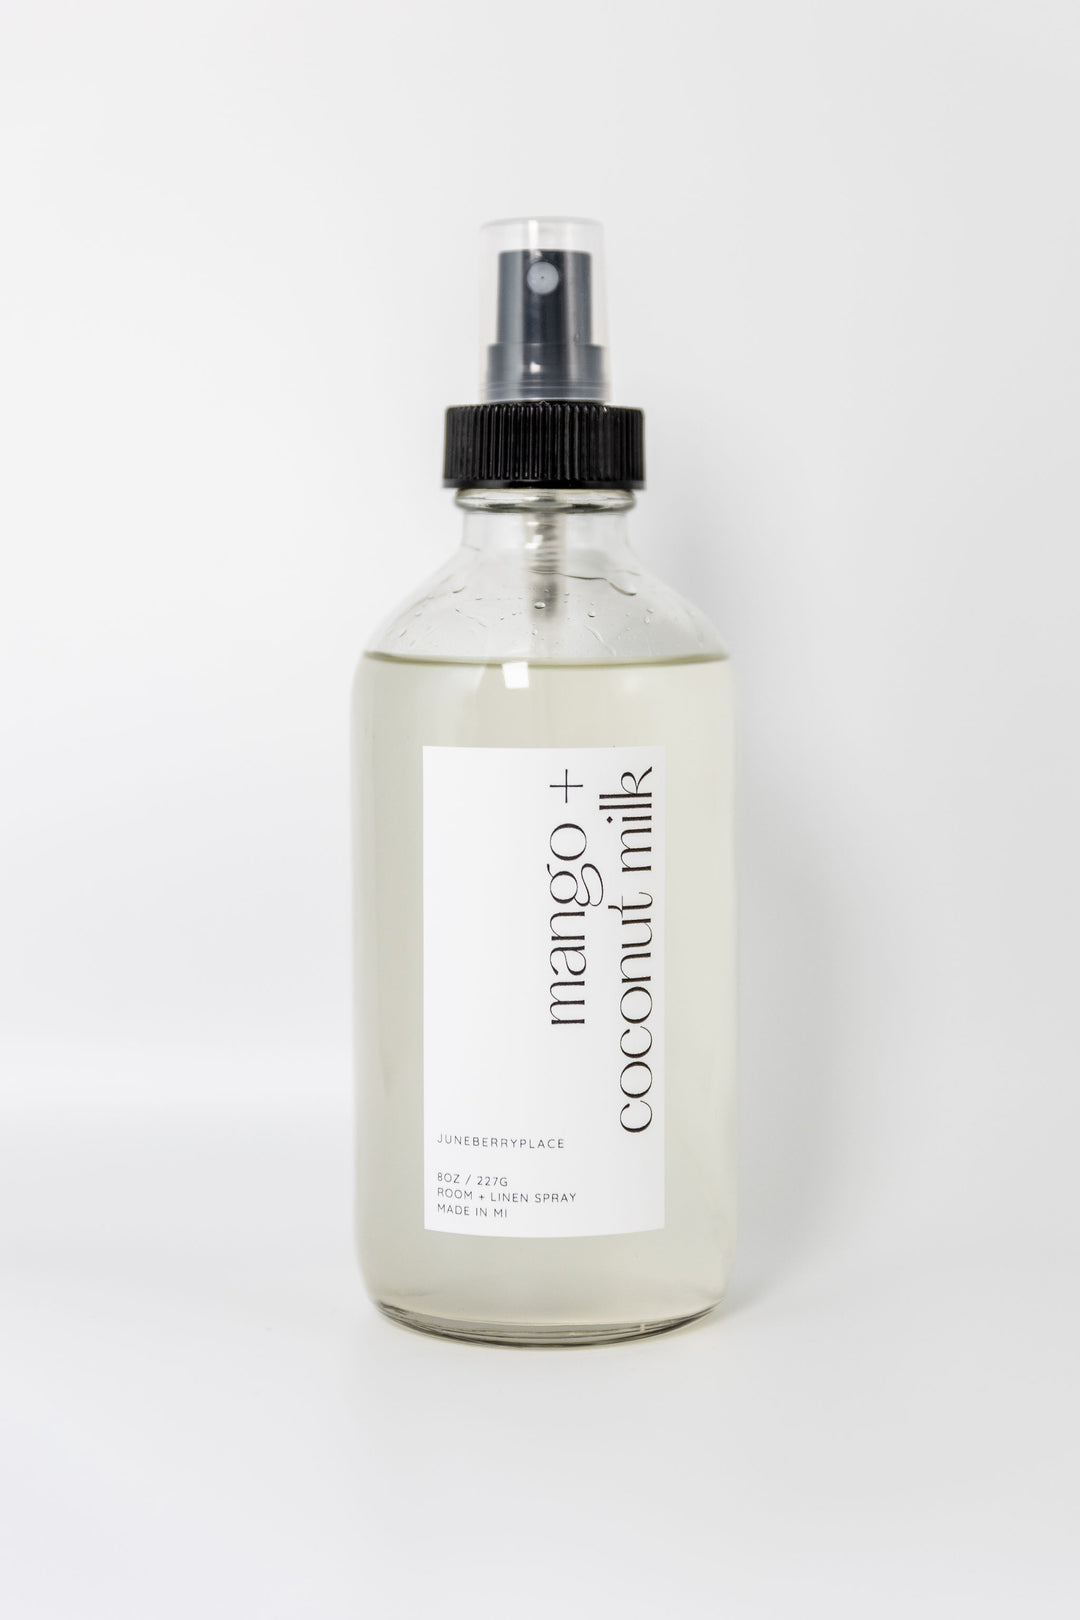 Mango and Coconut Milk Room + Linen Spray - Spring Collection in a glass bottle by juneberryplace home fragrances